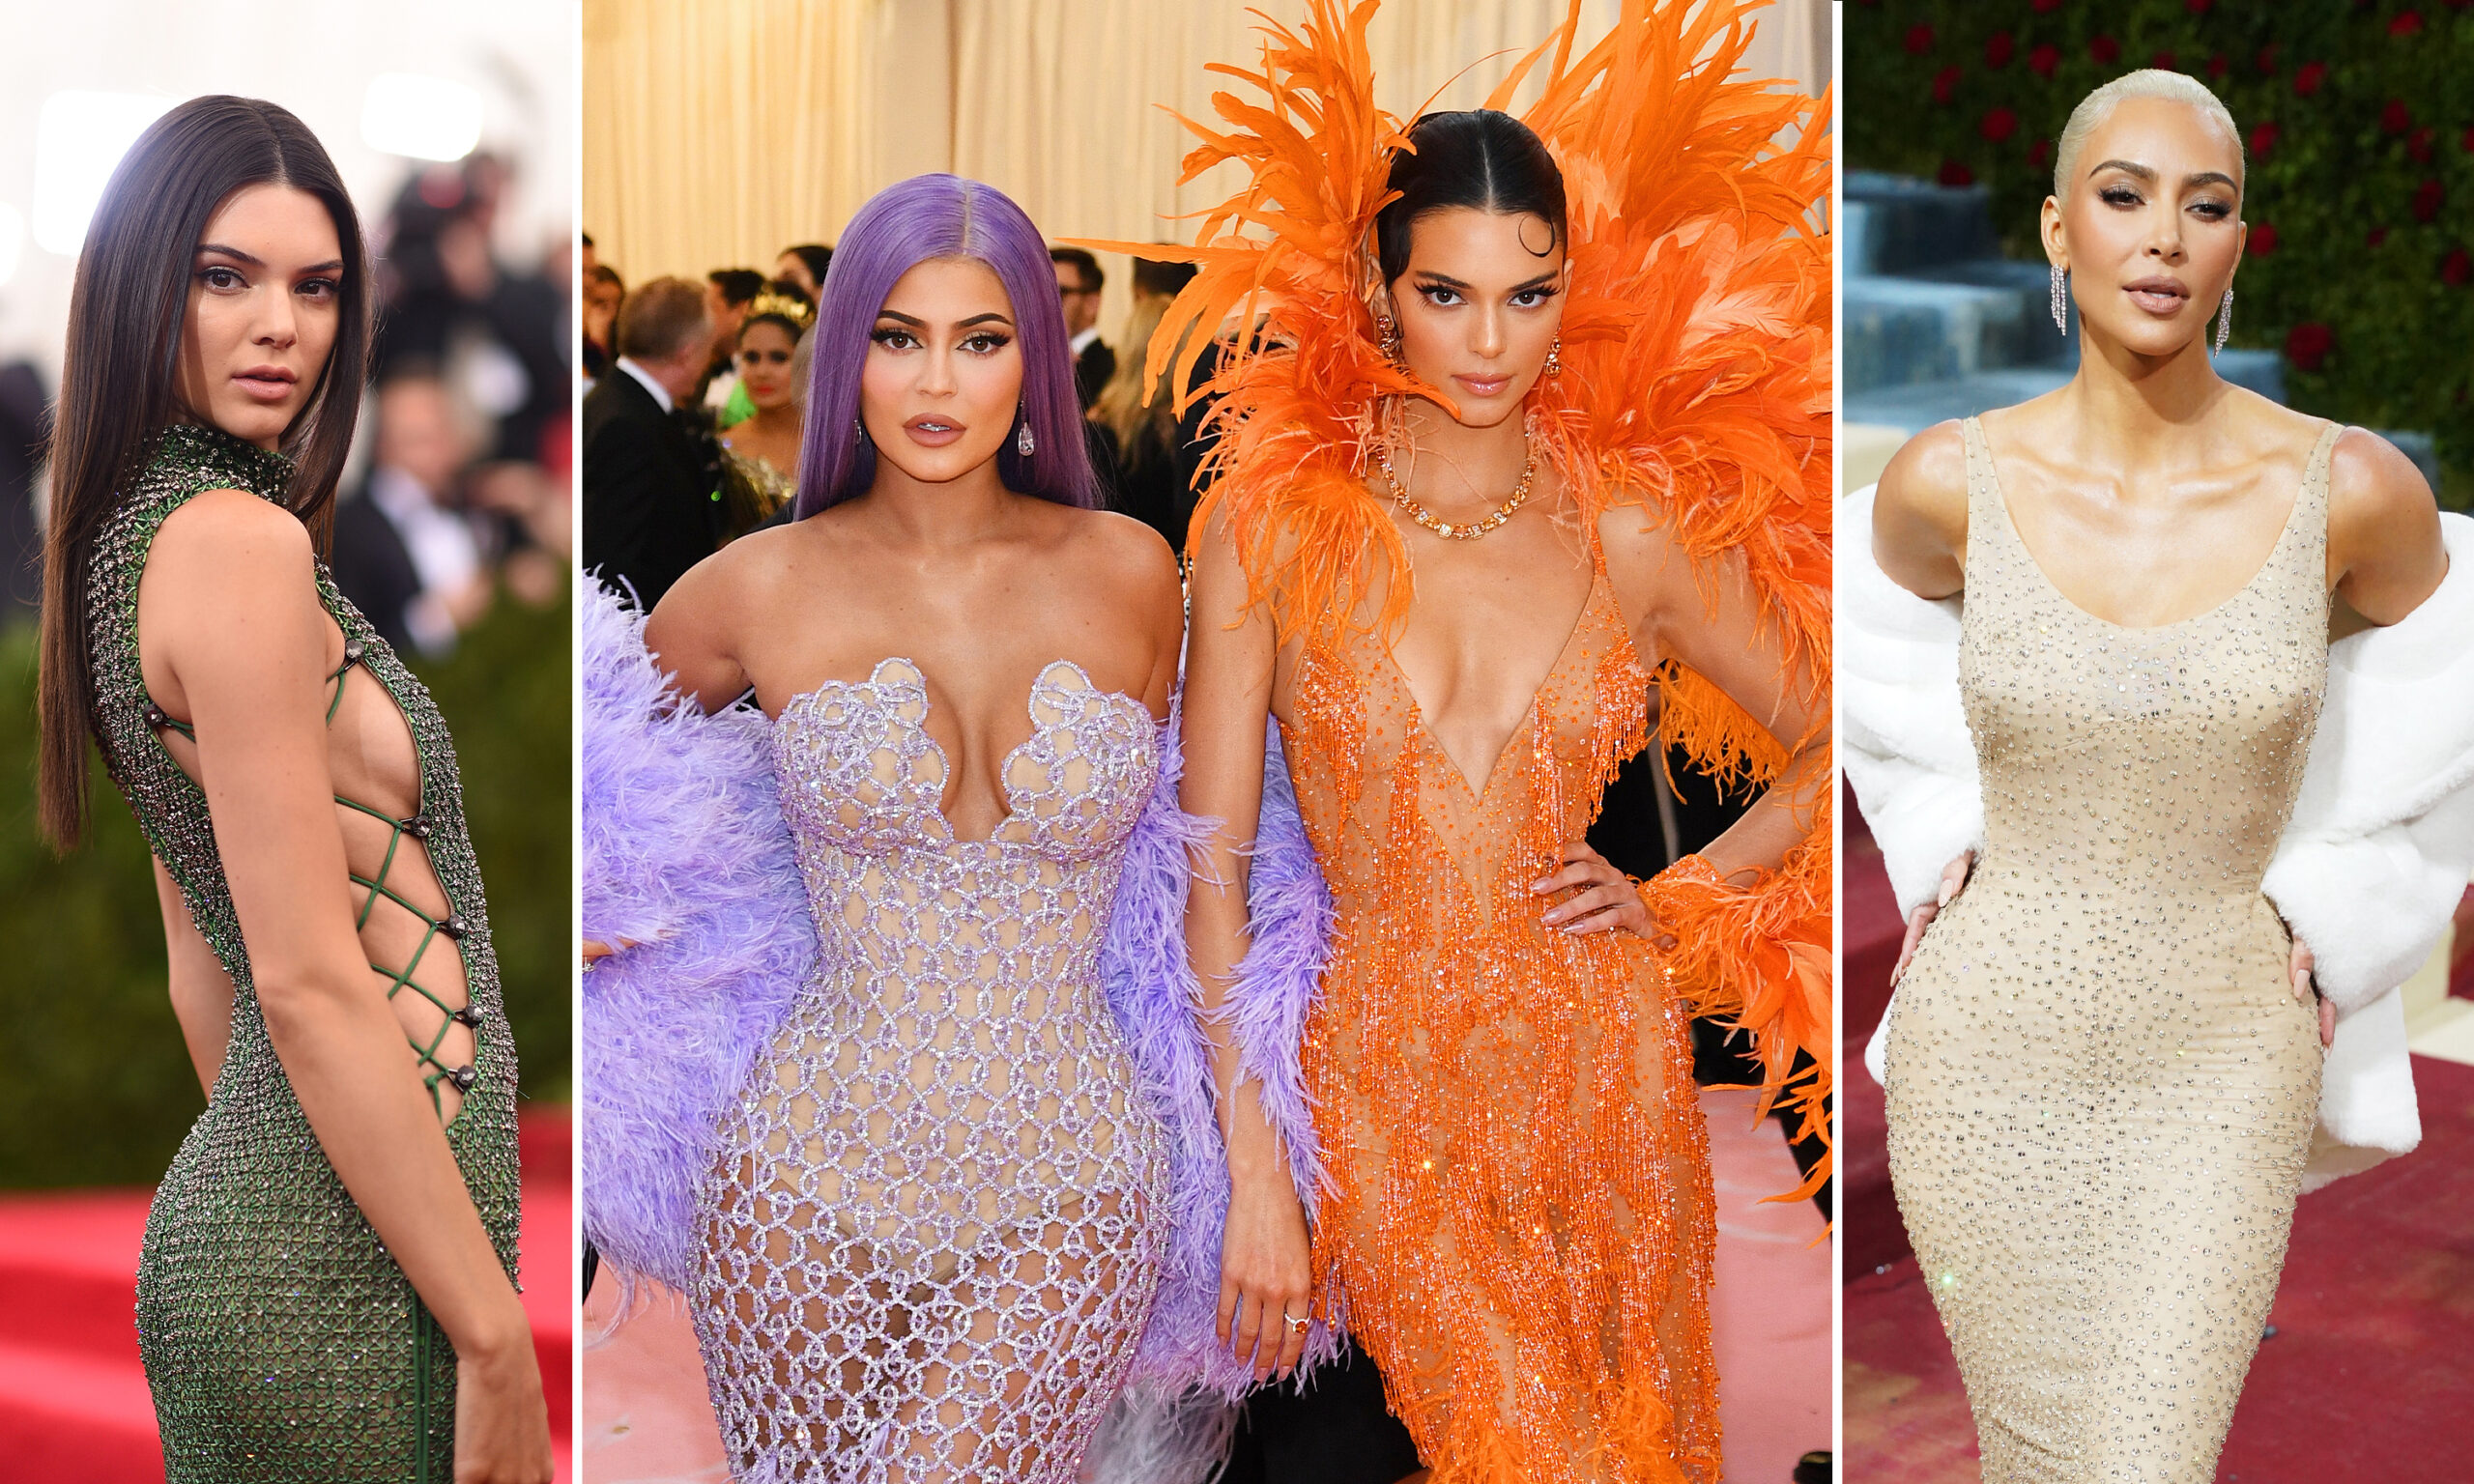 Kylie Jenner Wears Pink and Orange Gown Covered in Feathers